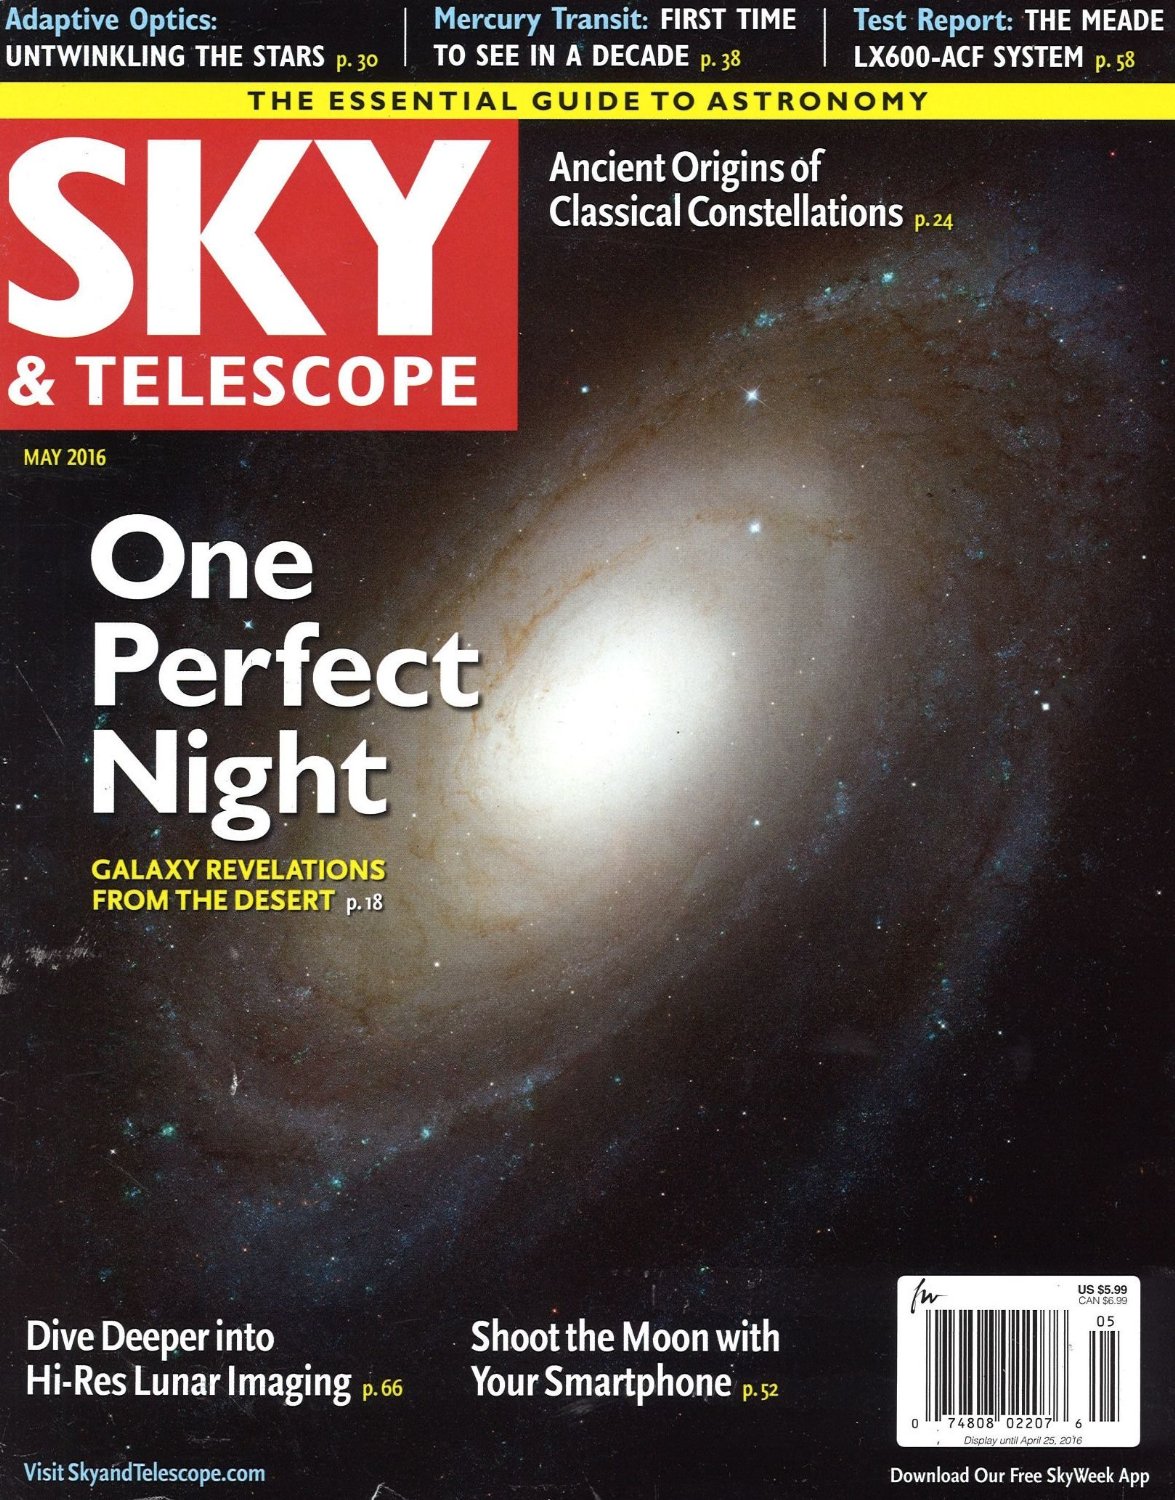 sky and telescope magazine subscription discount